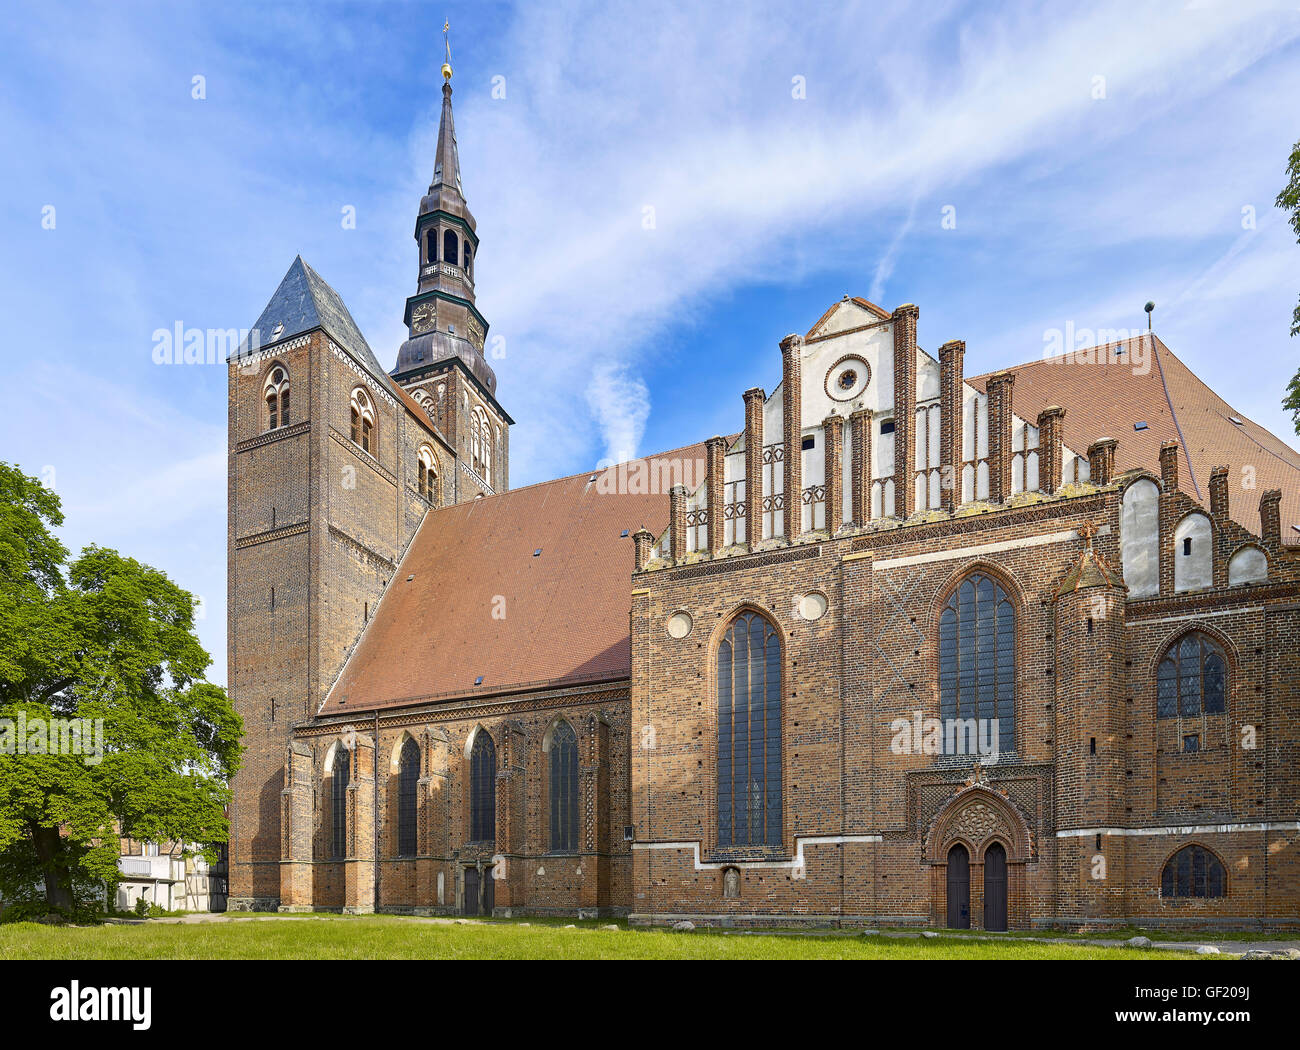 St. Stephen Church in Tangermuende, Germany Stock Photo